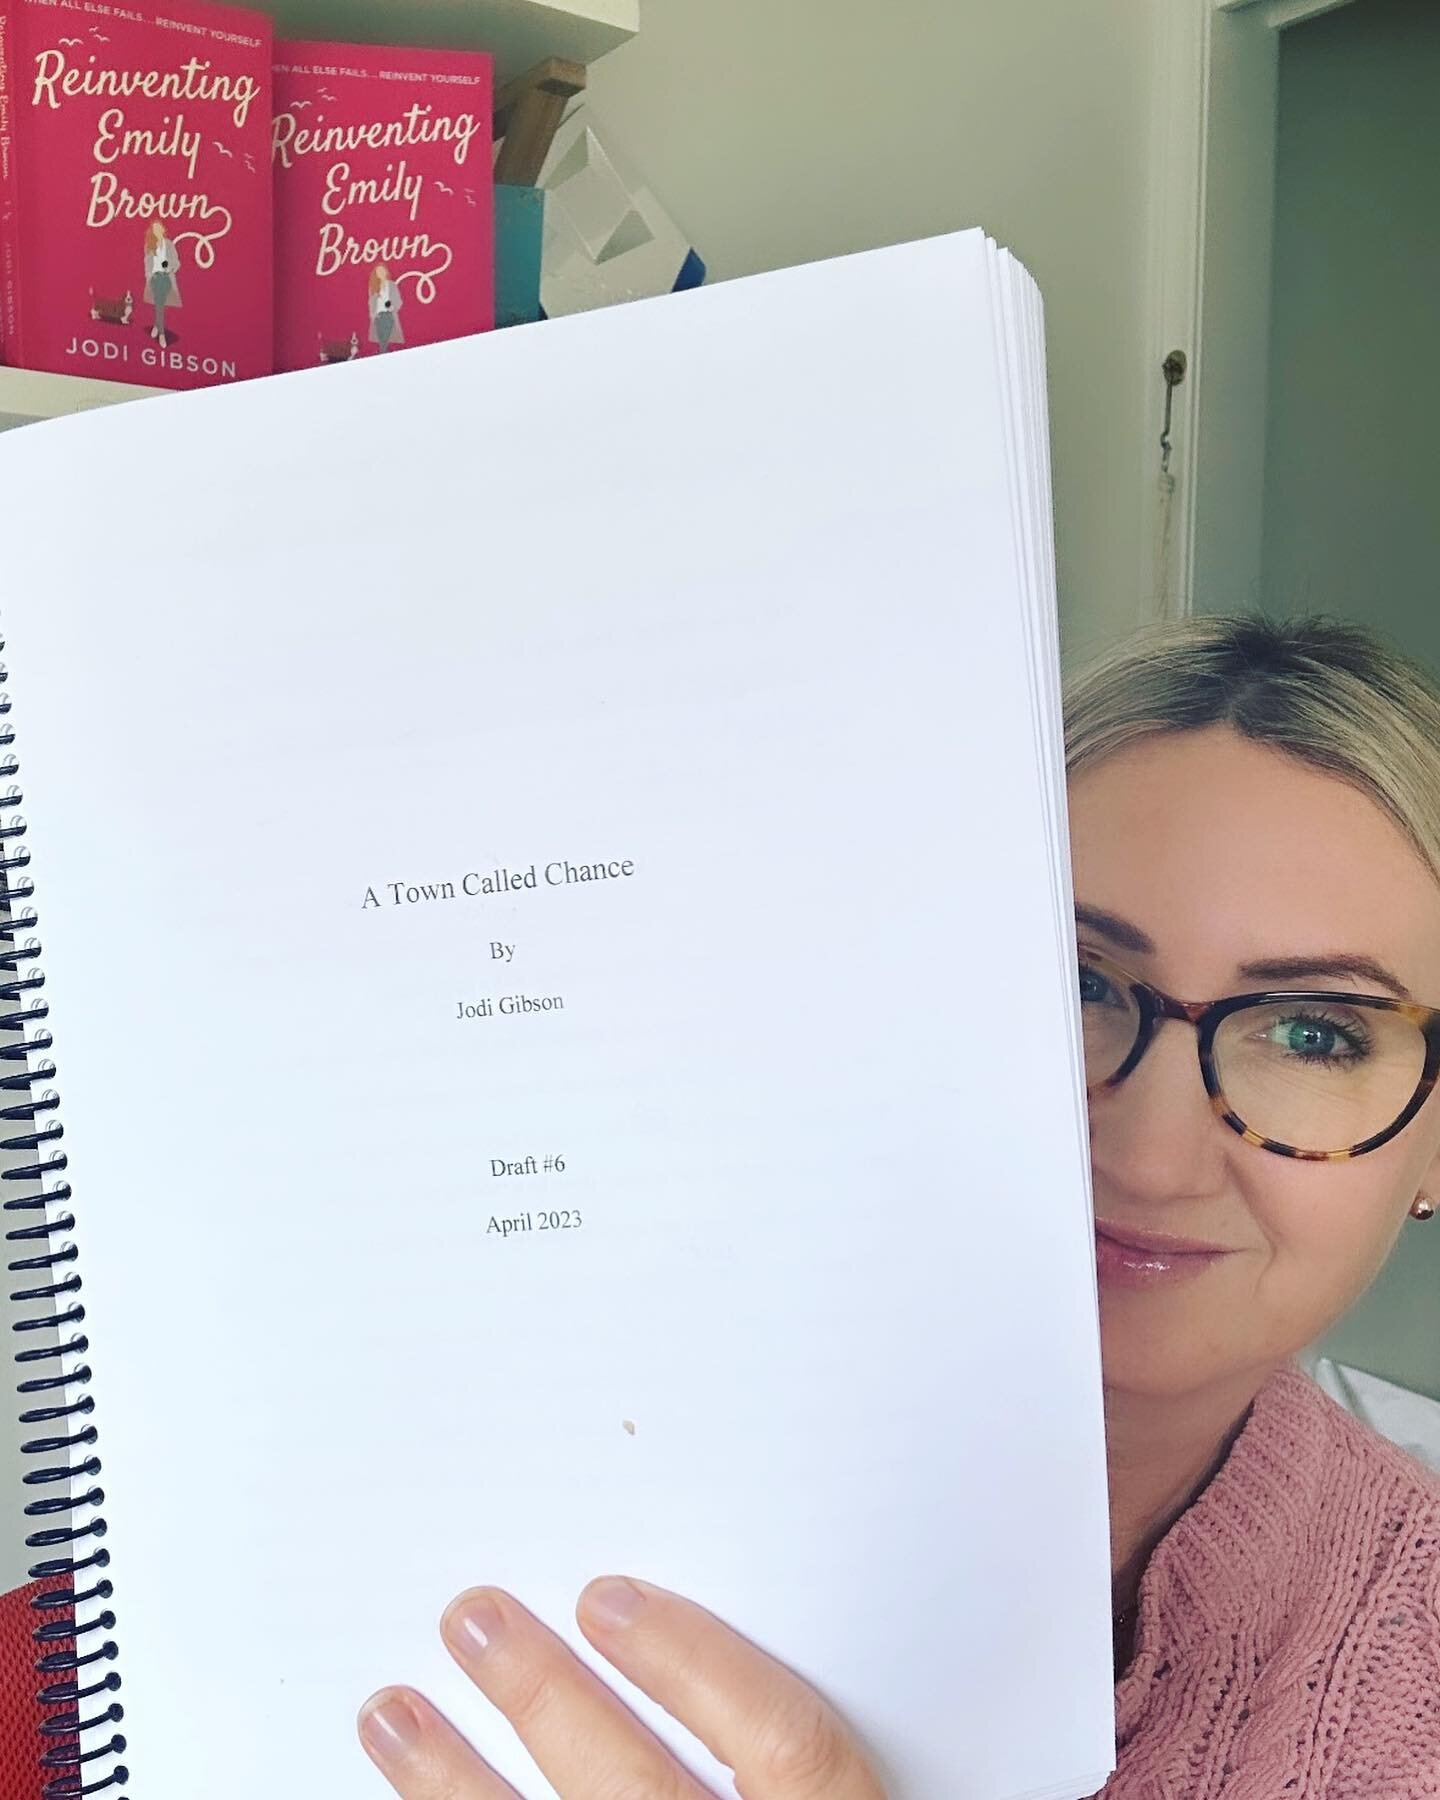 There&rsquo;s something special about a bound manuscript. Even if it is still only in draft form. Three weeks til this one is due on my editors desk, so time for a read through and my final edits of the rewrite. Wish me luck!

#authorlife #manuscript